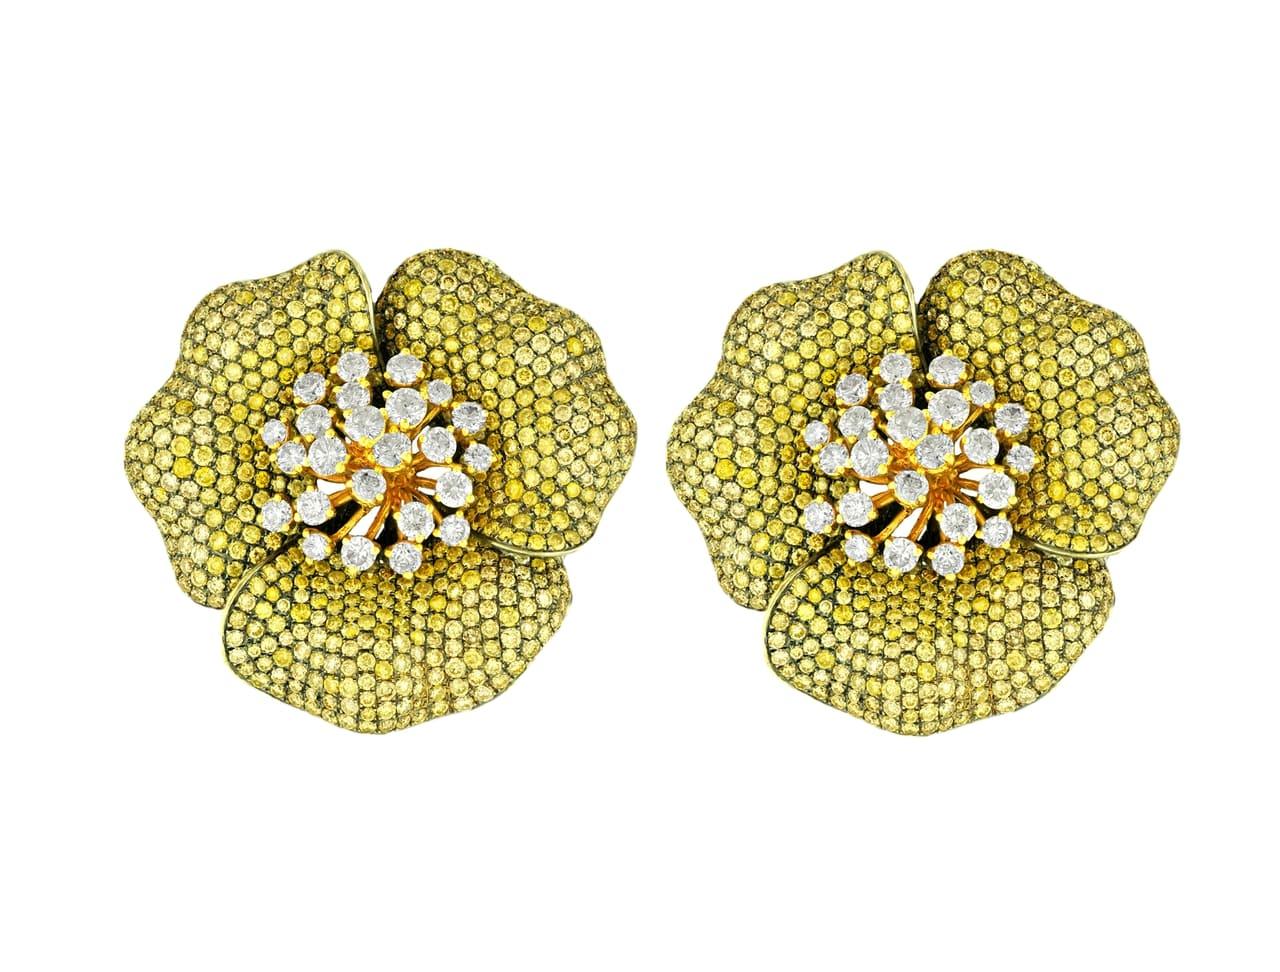 18 kt white gold rhodium plated earrings with a flower design adorned with 19.00 cts tw of diamond